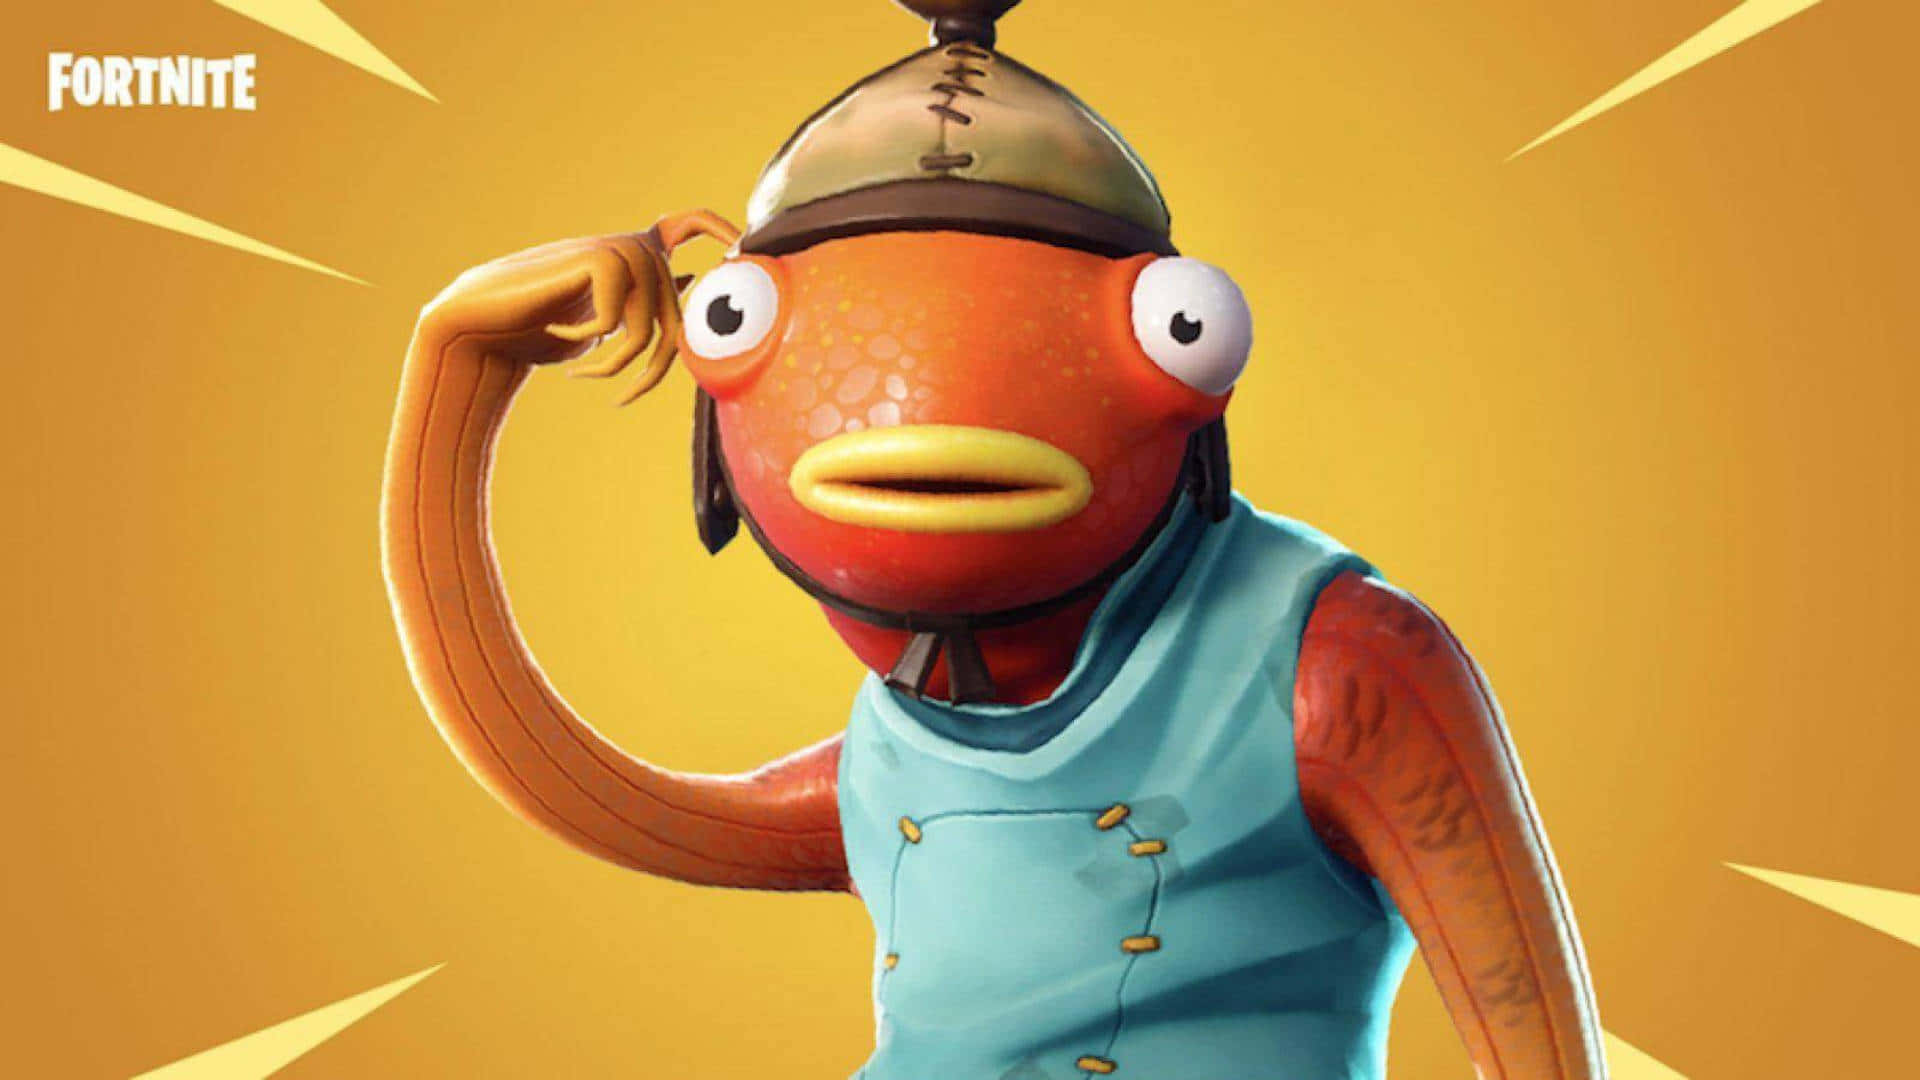 Check out Fortnite's cheeky new avatar, Fishstick Wallpaper